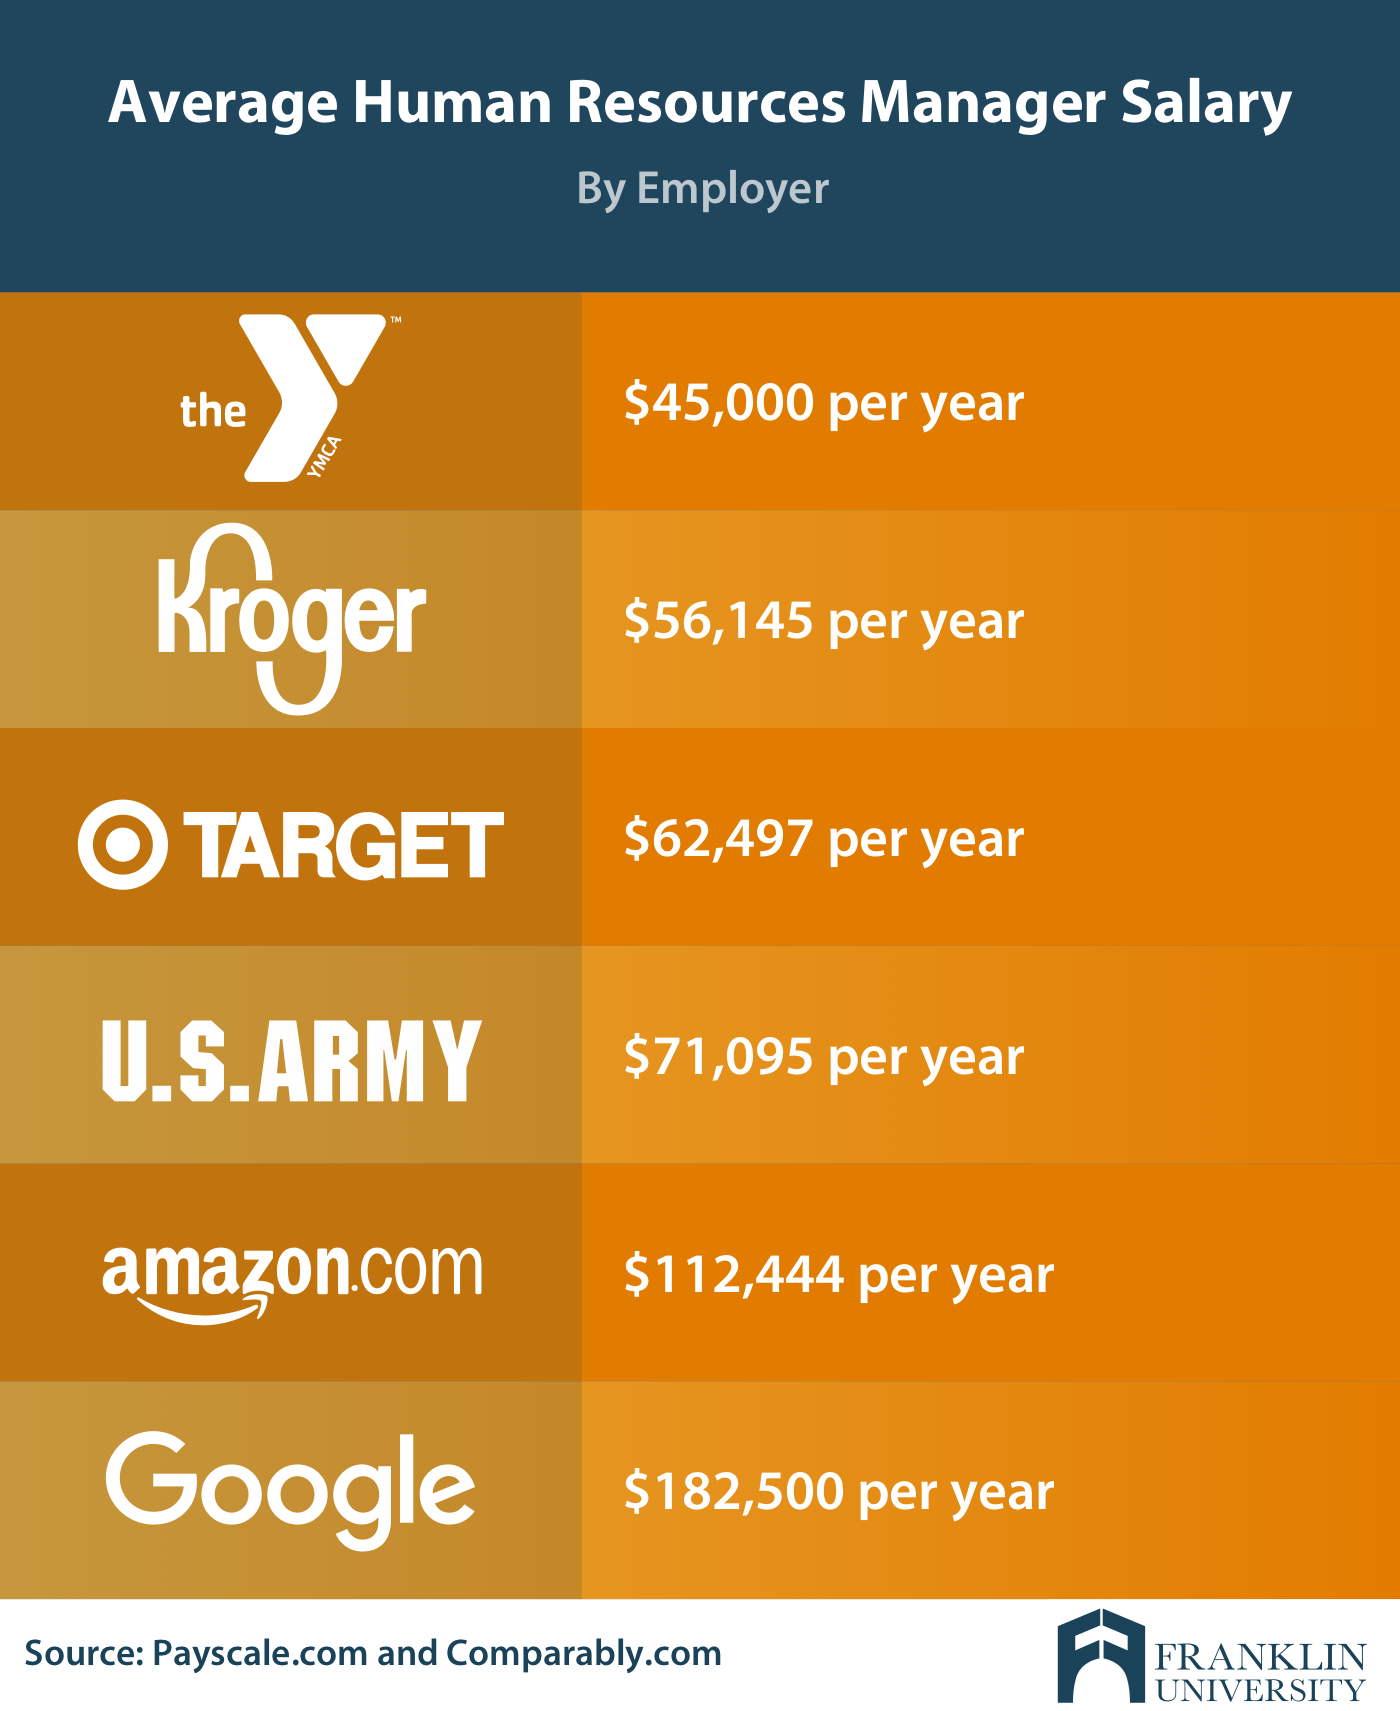 graphic describing the average human resources manager salary by employer